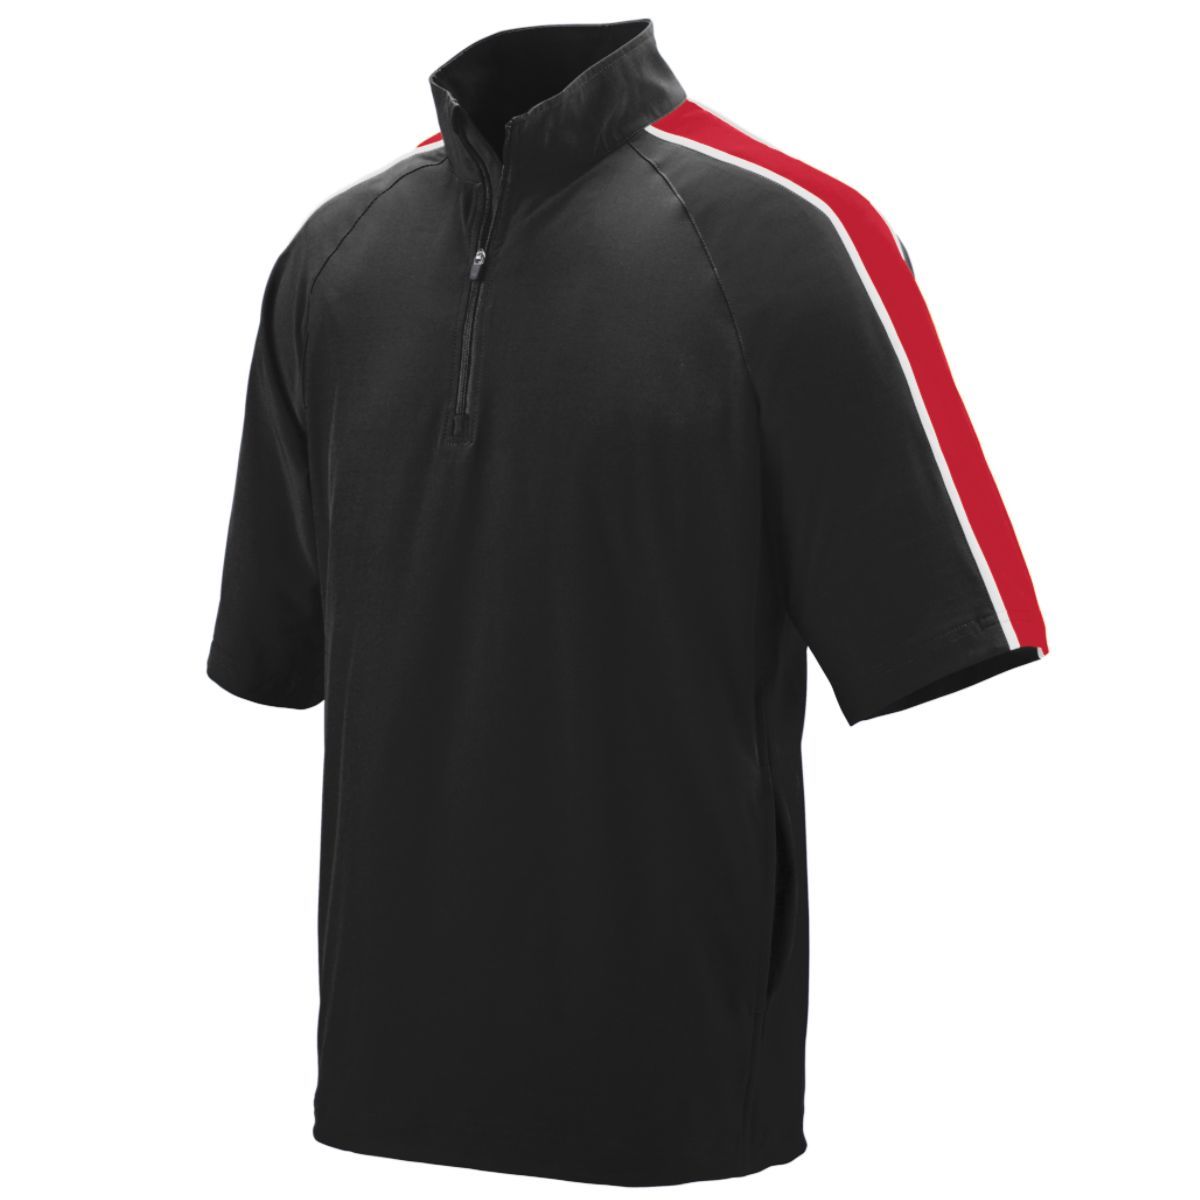 Augusta Sportswear Quantum Short Sleeve Pullover in Black/Red/White  -Part of the Adult, Adult-Jacket, Augusta-Products, Outerwear product lines at KanaleyCreations.com